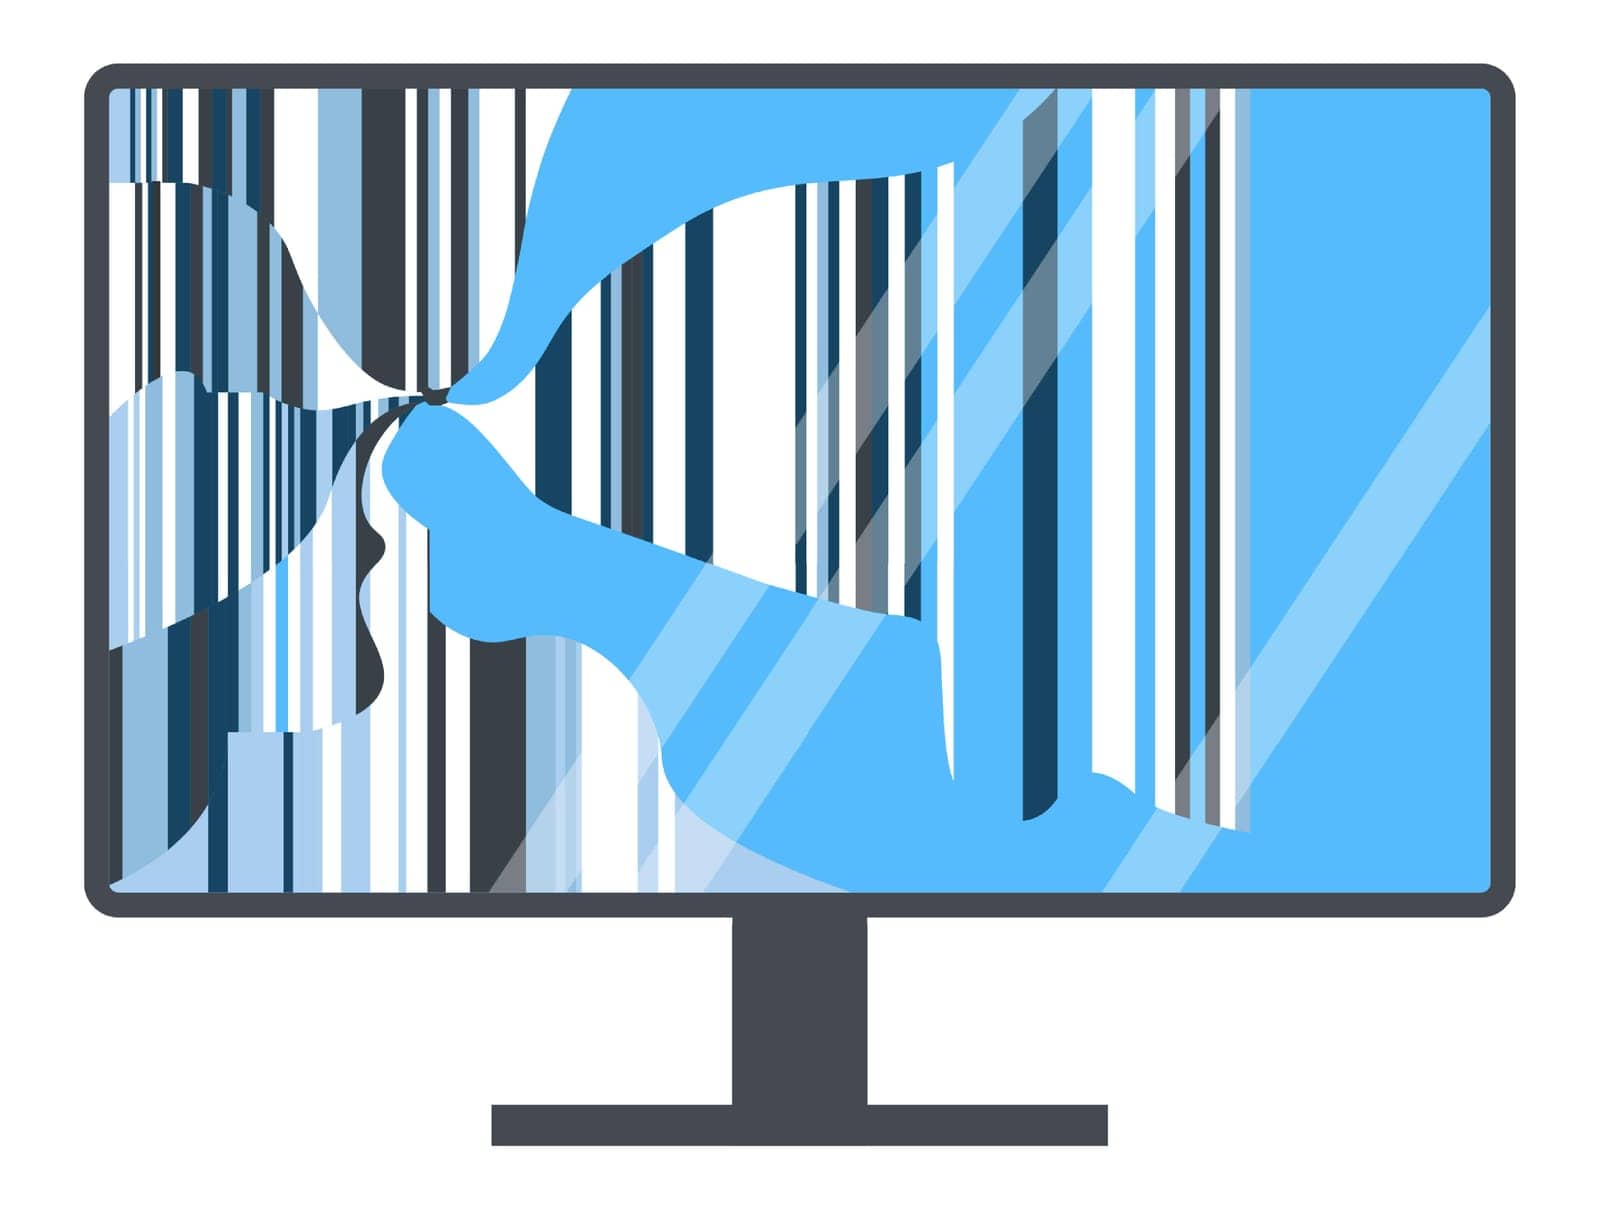 Damaged or broken screen of computer or TV set, isolated icon of device gadgets with crashed pixels and display. Malfunctioning electronics and parts, shattered and cracked glass. Vector in flat style